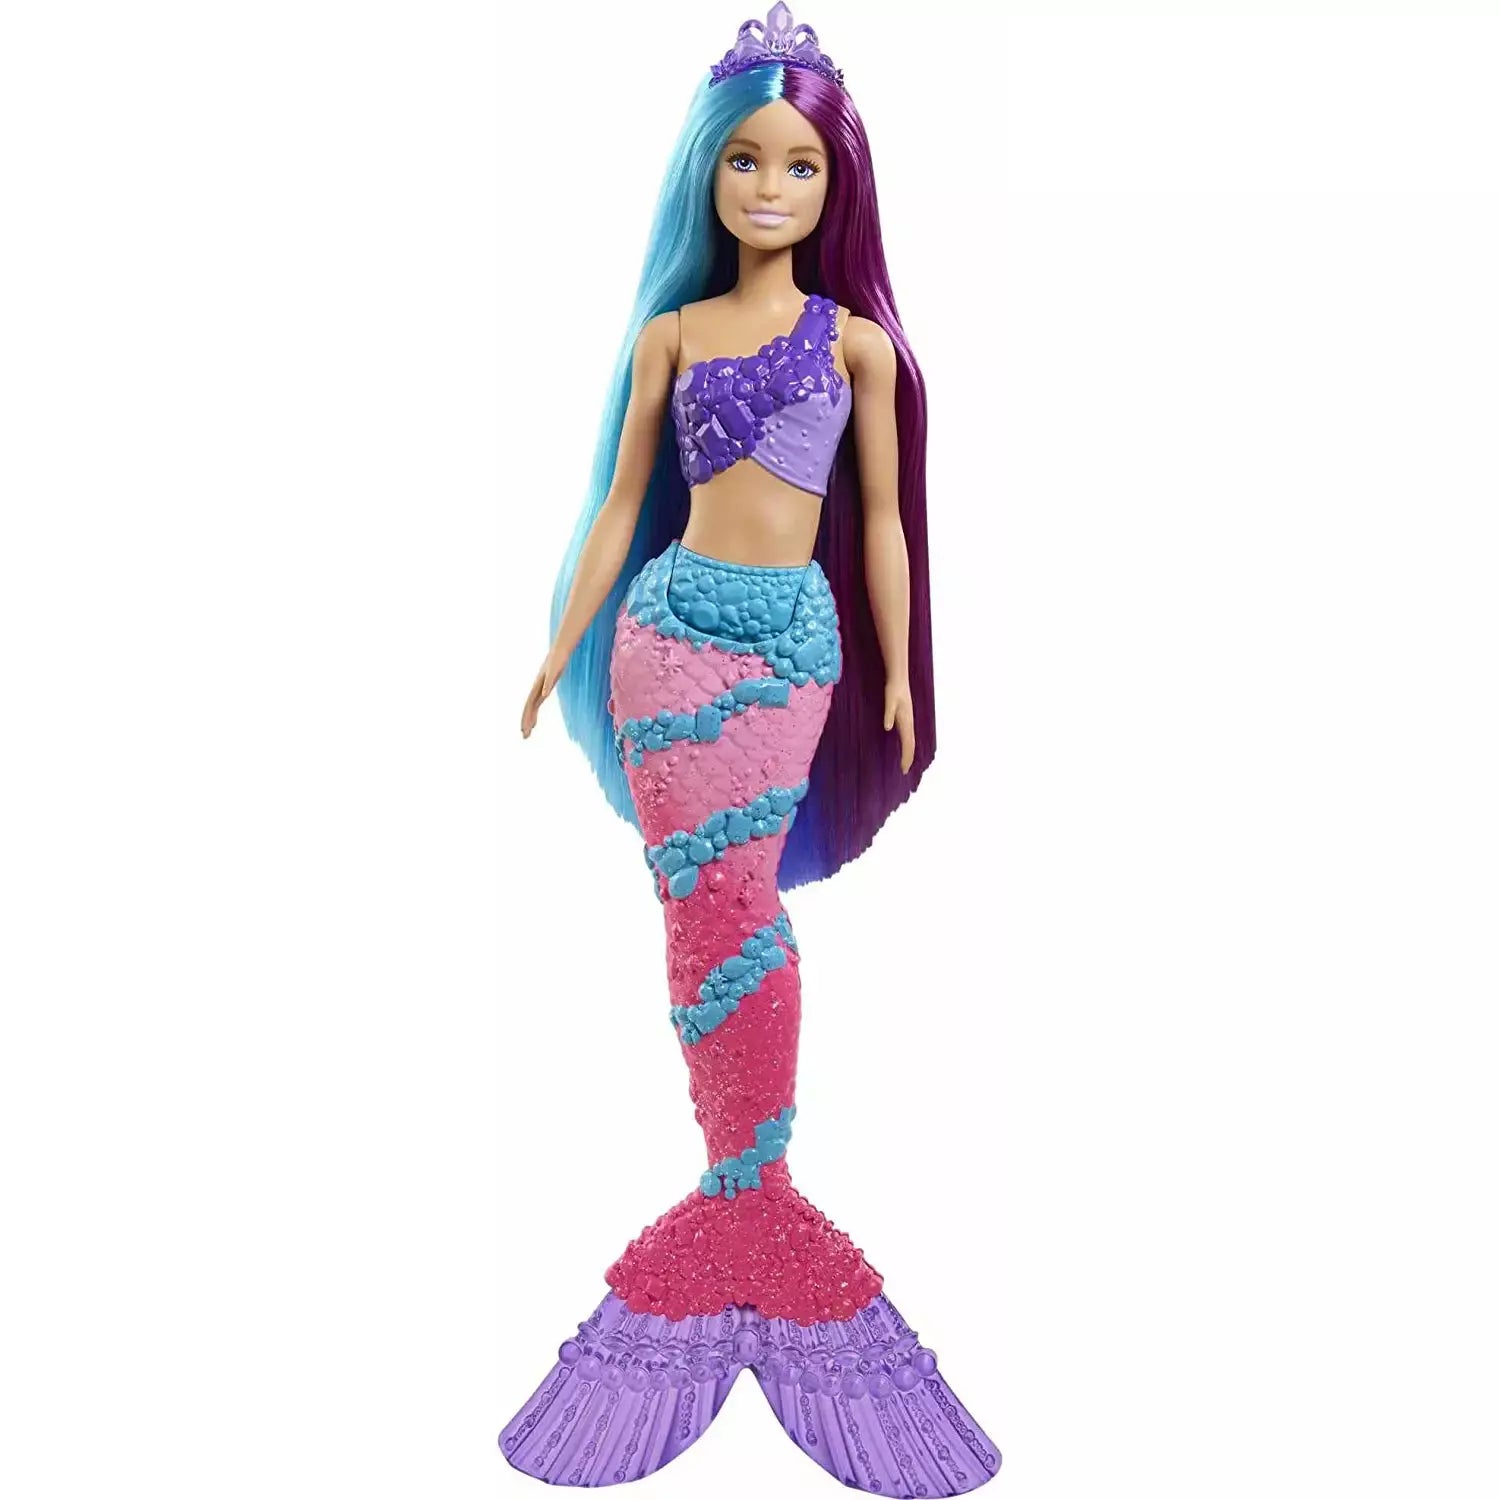 Barbie Dreamtopia Mermaid Doll (13-inch) with Extra-Long Two-Tone Fantasy Hair, Hairbrush, Tiaras and Styling Accessories - BumbleToys - 5-7 Years, Barbie, Fashion Dolls & Accessories, Girls, Mermaid